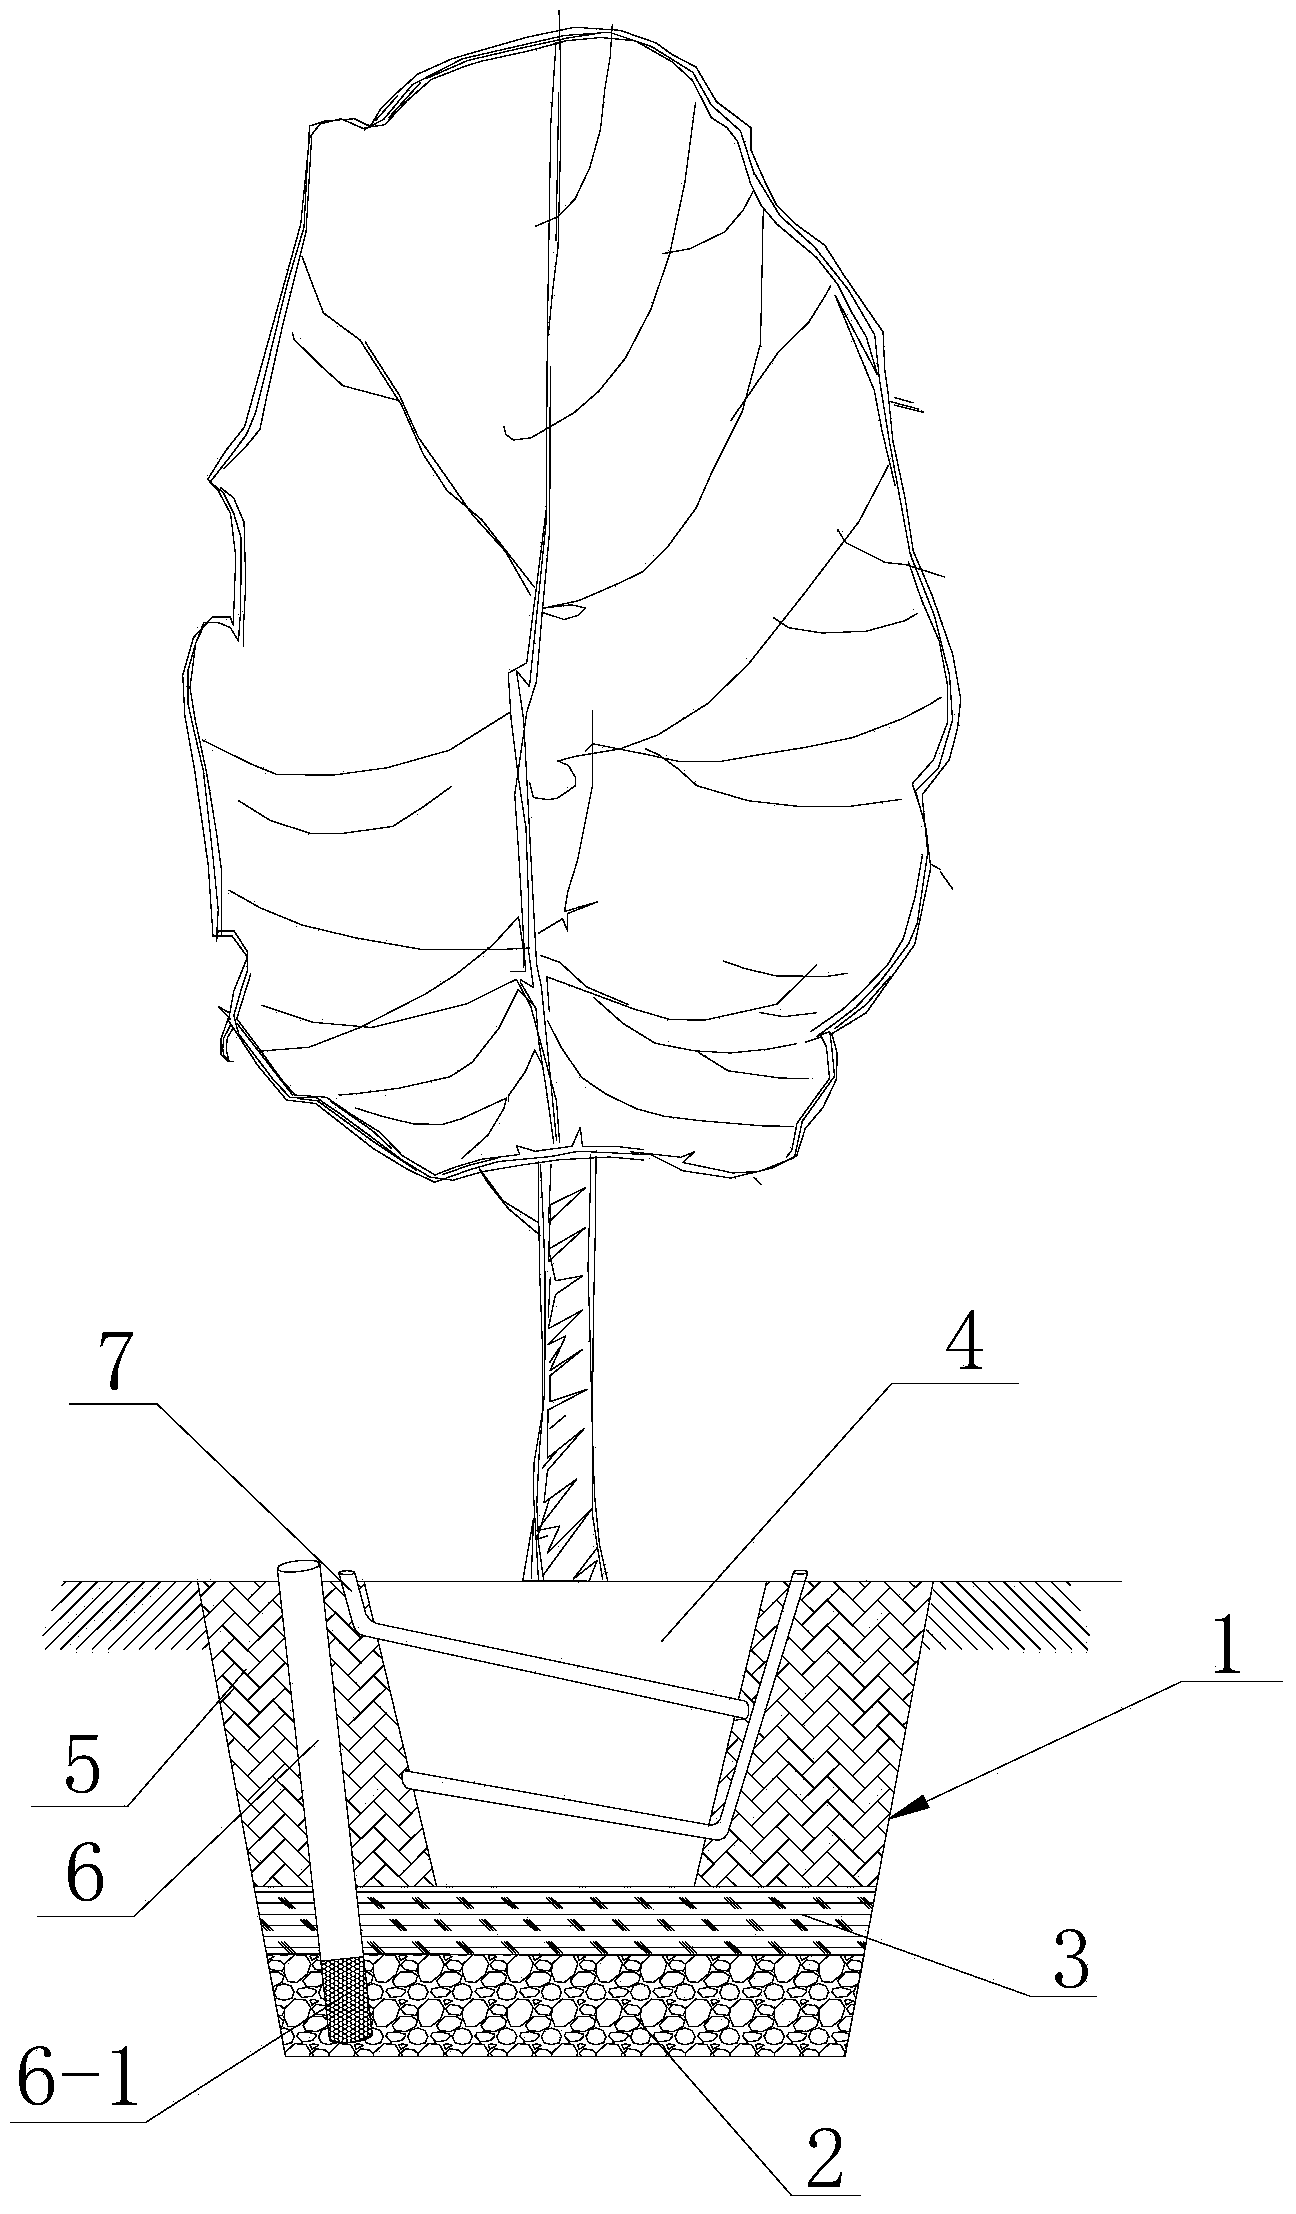 Method for transplanting large-sized landscape tree in saline-alkali soil and structural layout for transplanted-tree pit